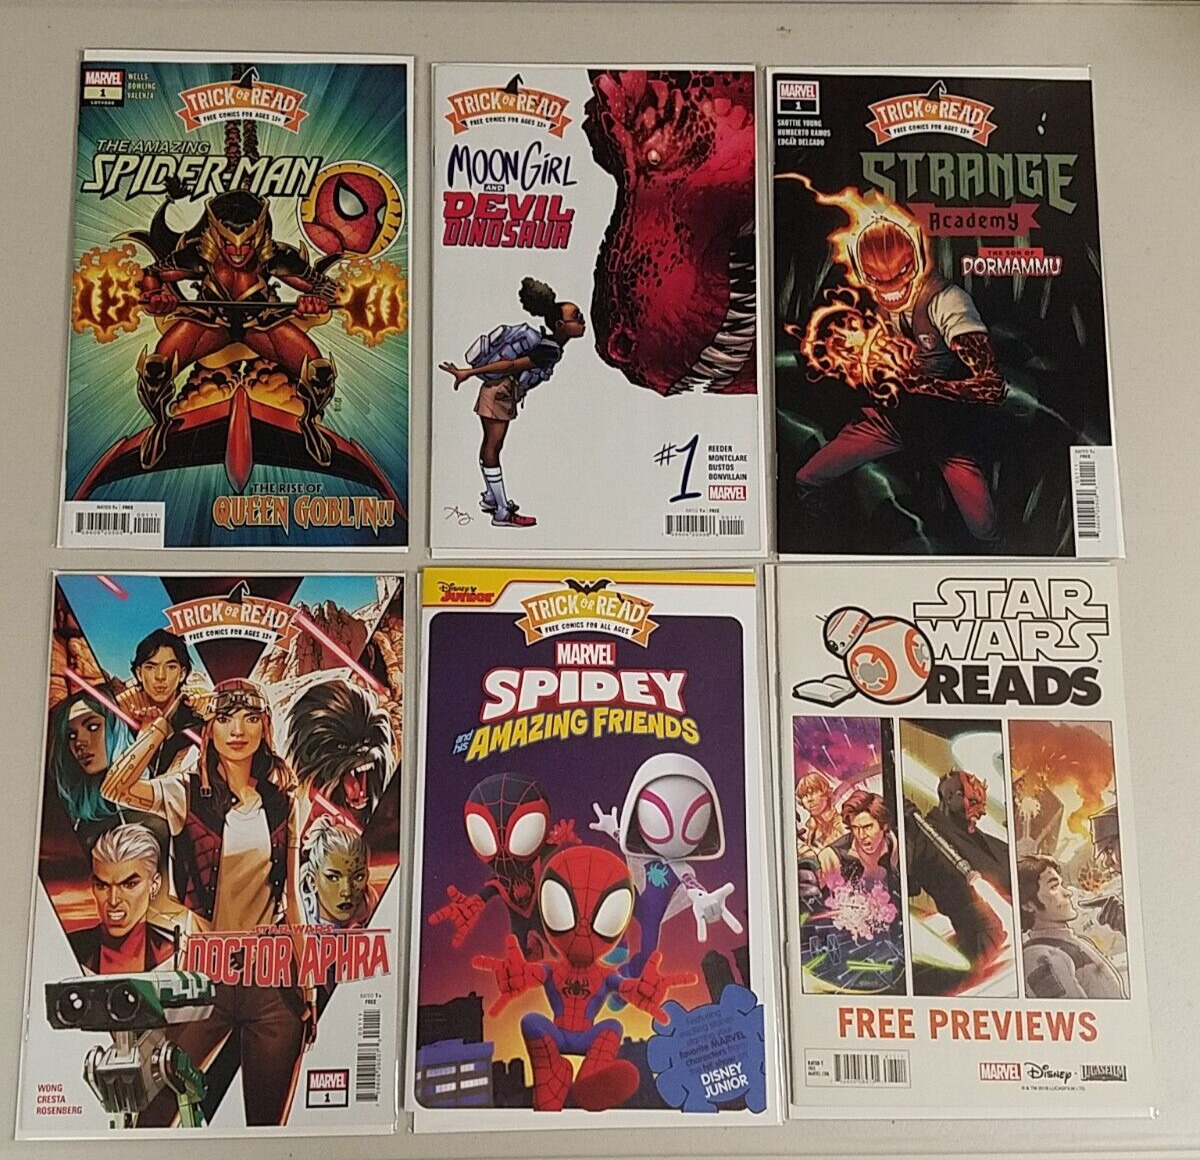 Trick-or-Read 2022 and Star Wars Reads Preview Marvel Comics Lot of 6 VF/NM